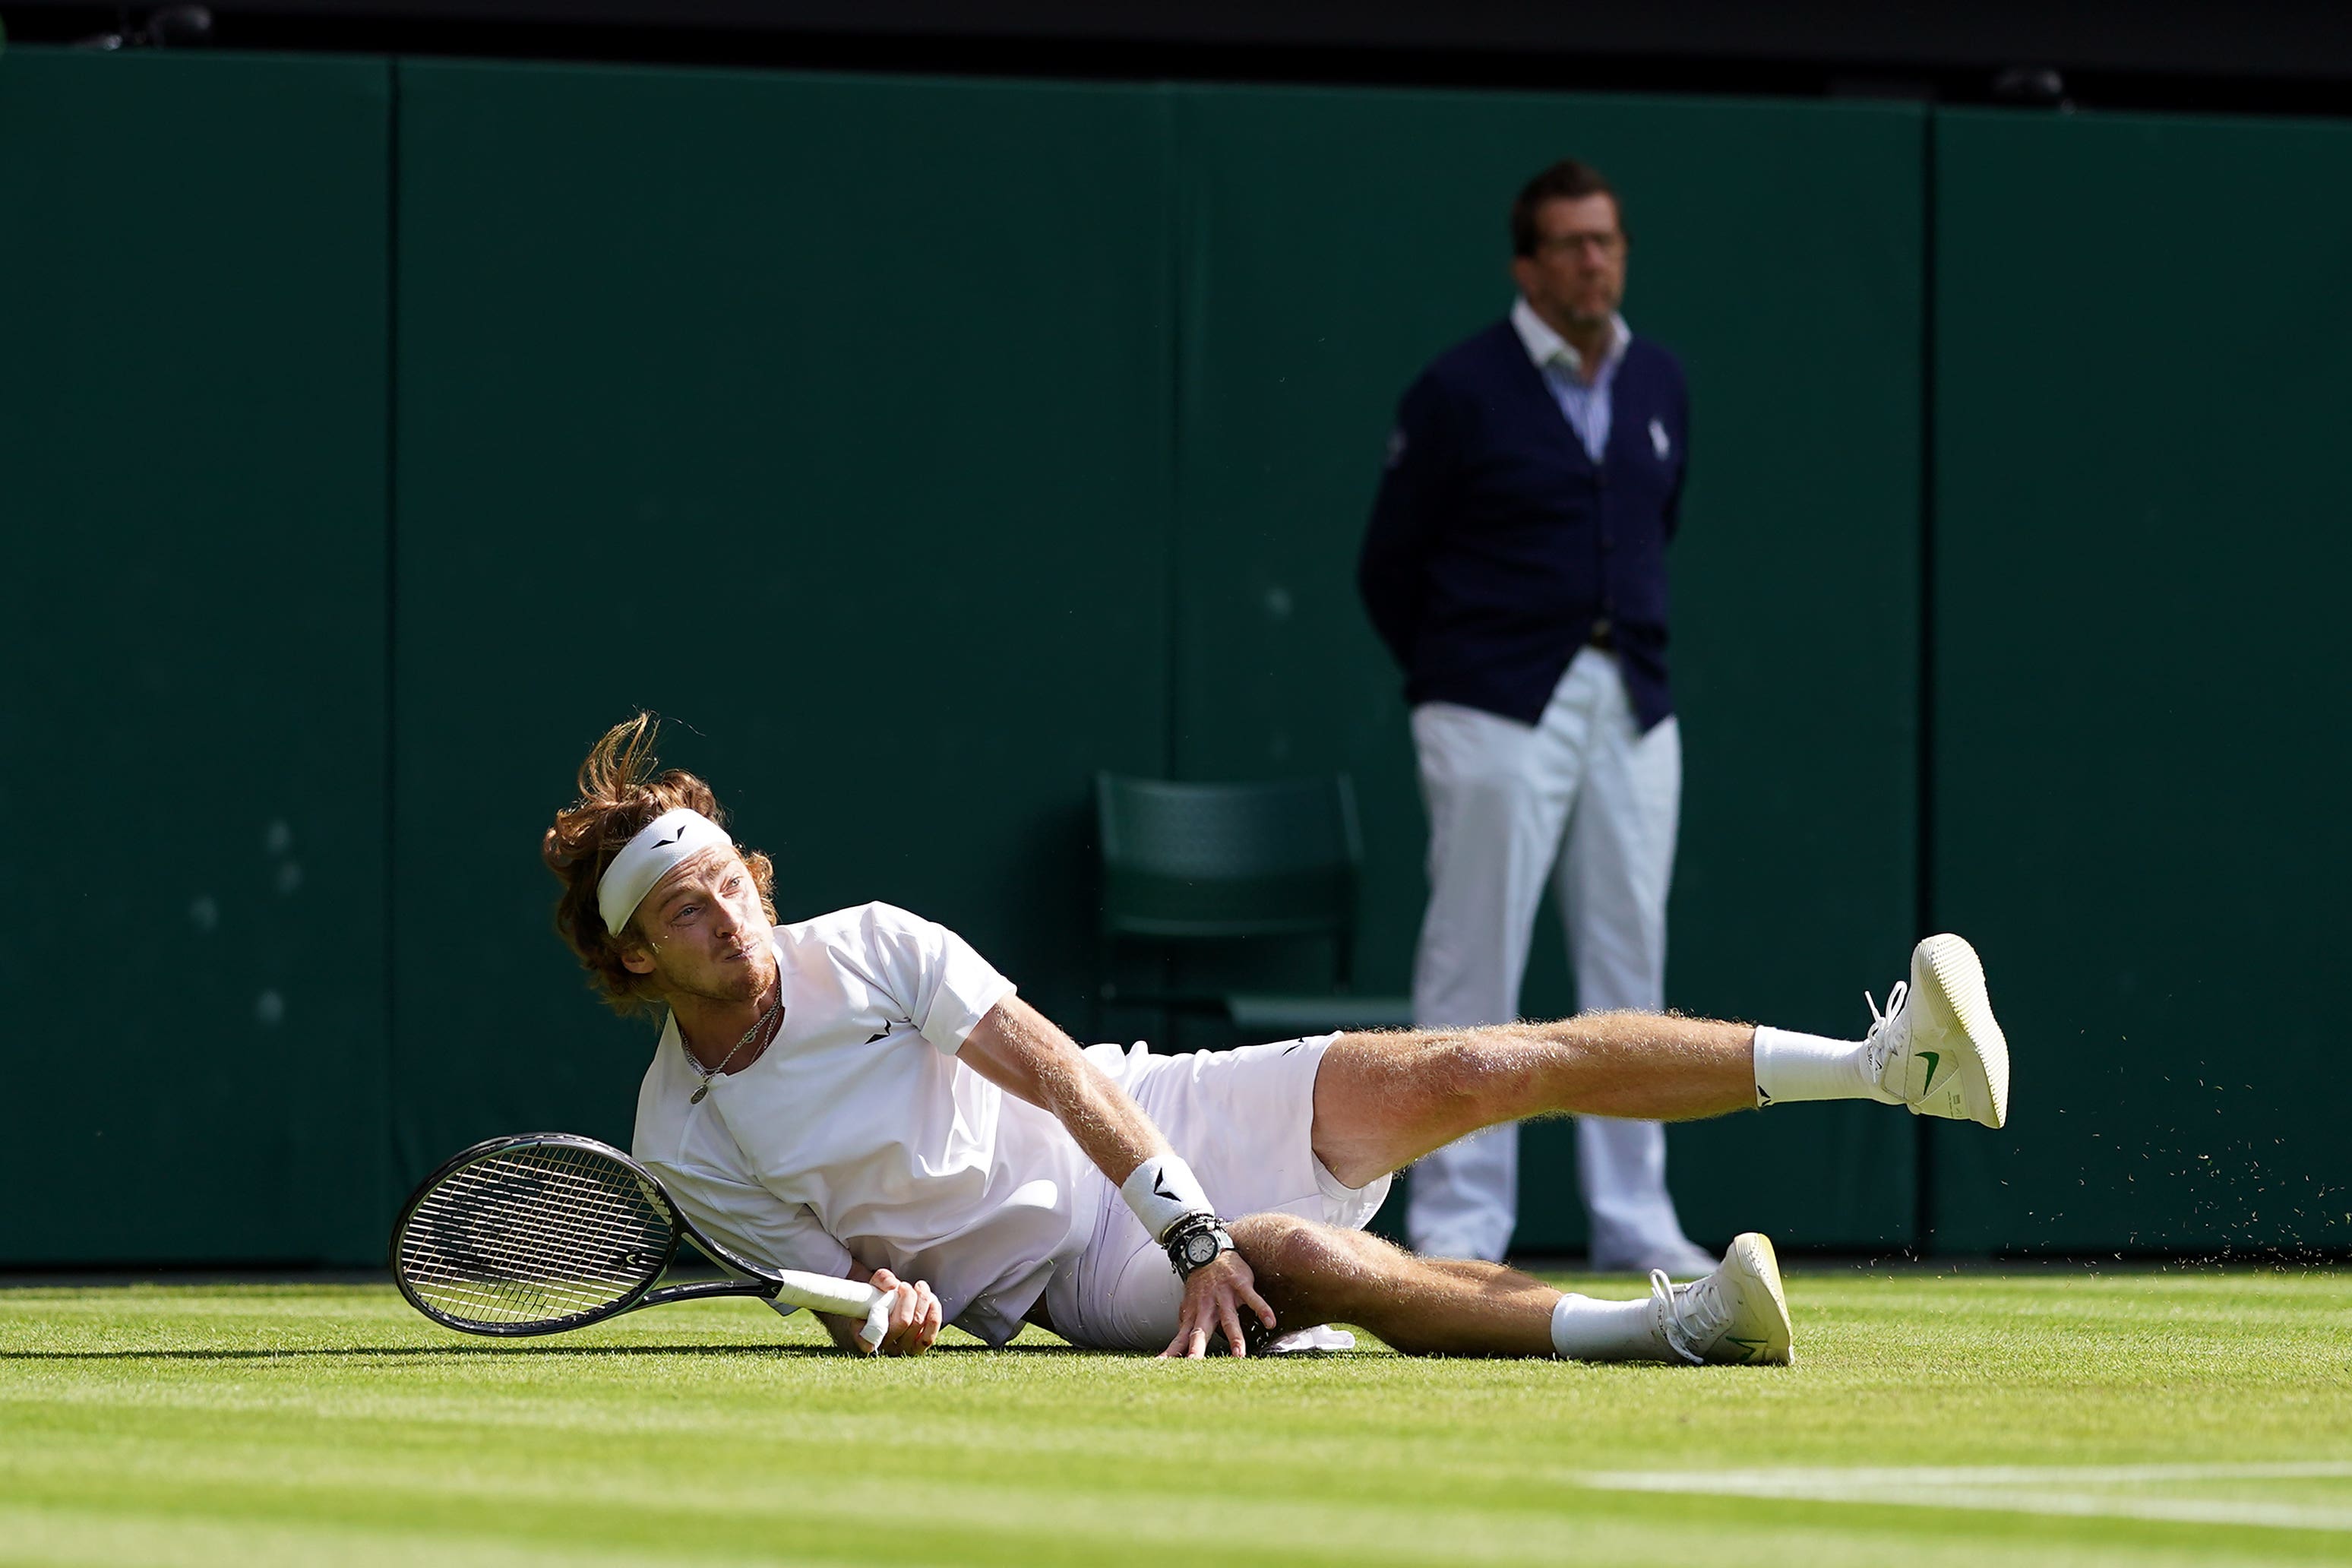 Andrey Rublev hits one of Wimbledons great shots in epic Centre Court win The Independent